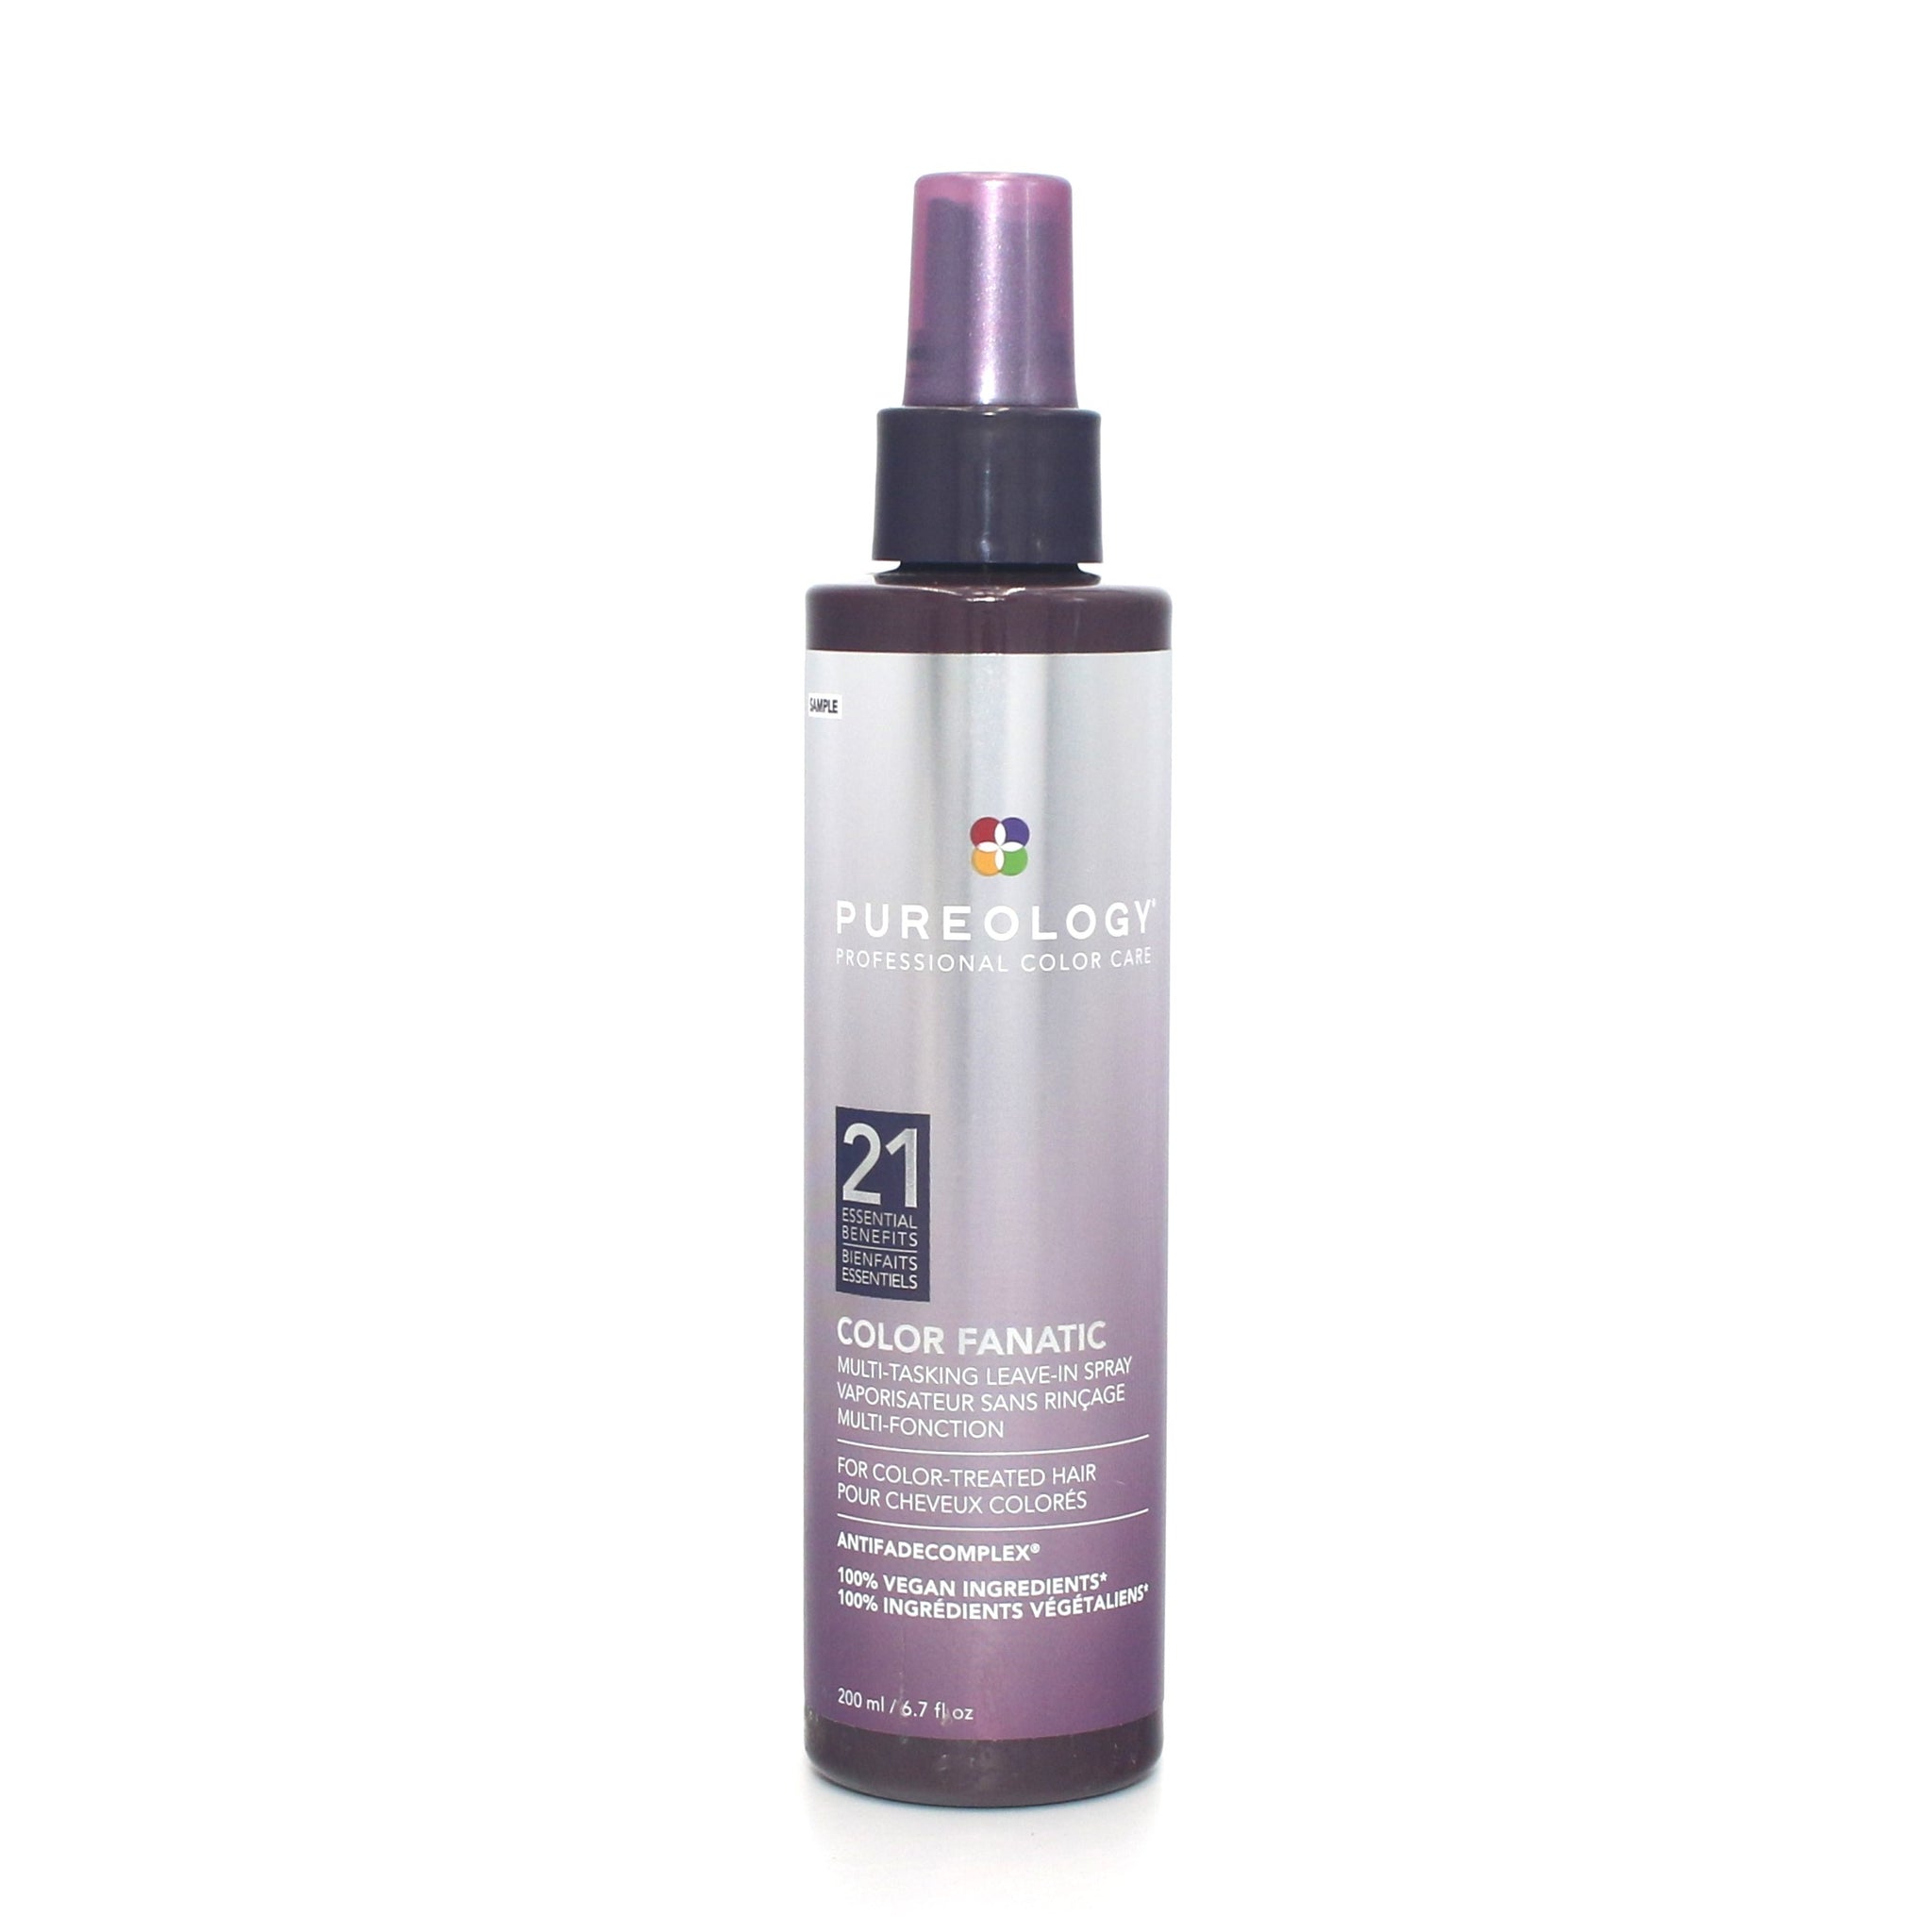 Pureology Color Fanatic Multi Tasking Leave In Spray 6.7 oz